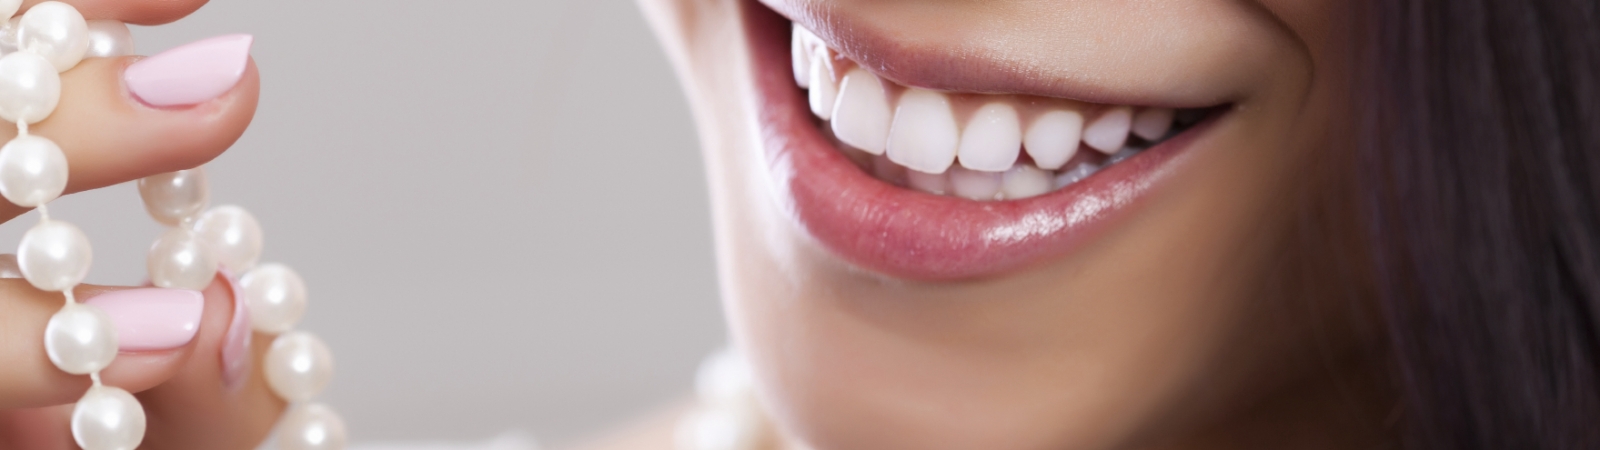 Tooth whitening at Concord dental practice